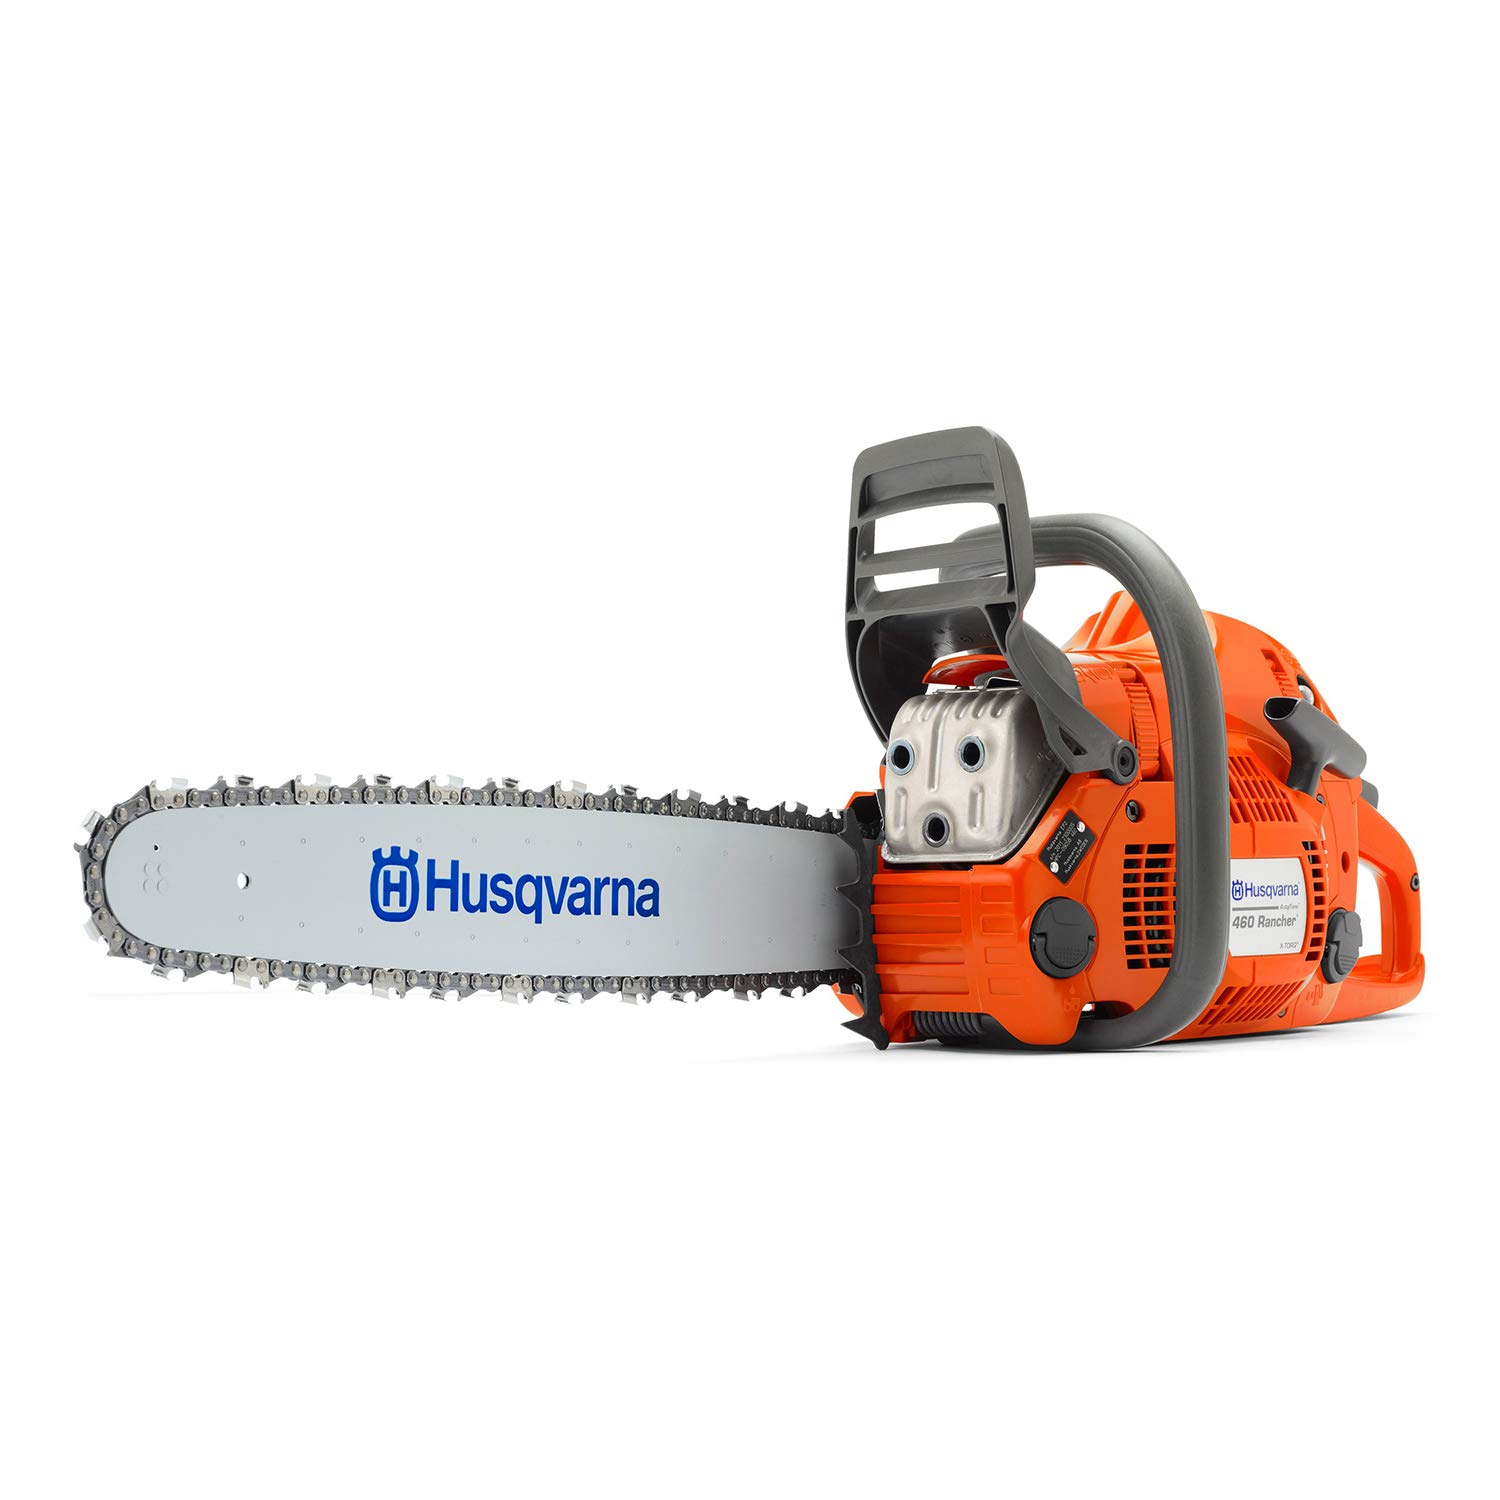 Husqvarna 460 Rancher Side-Mounted Chain Gas Chainsaw, 24-Inch